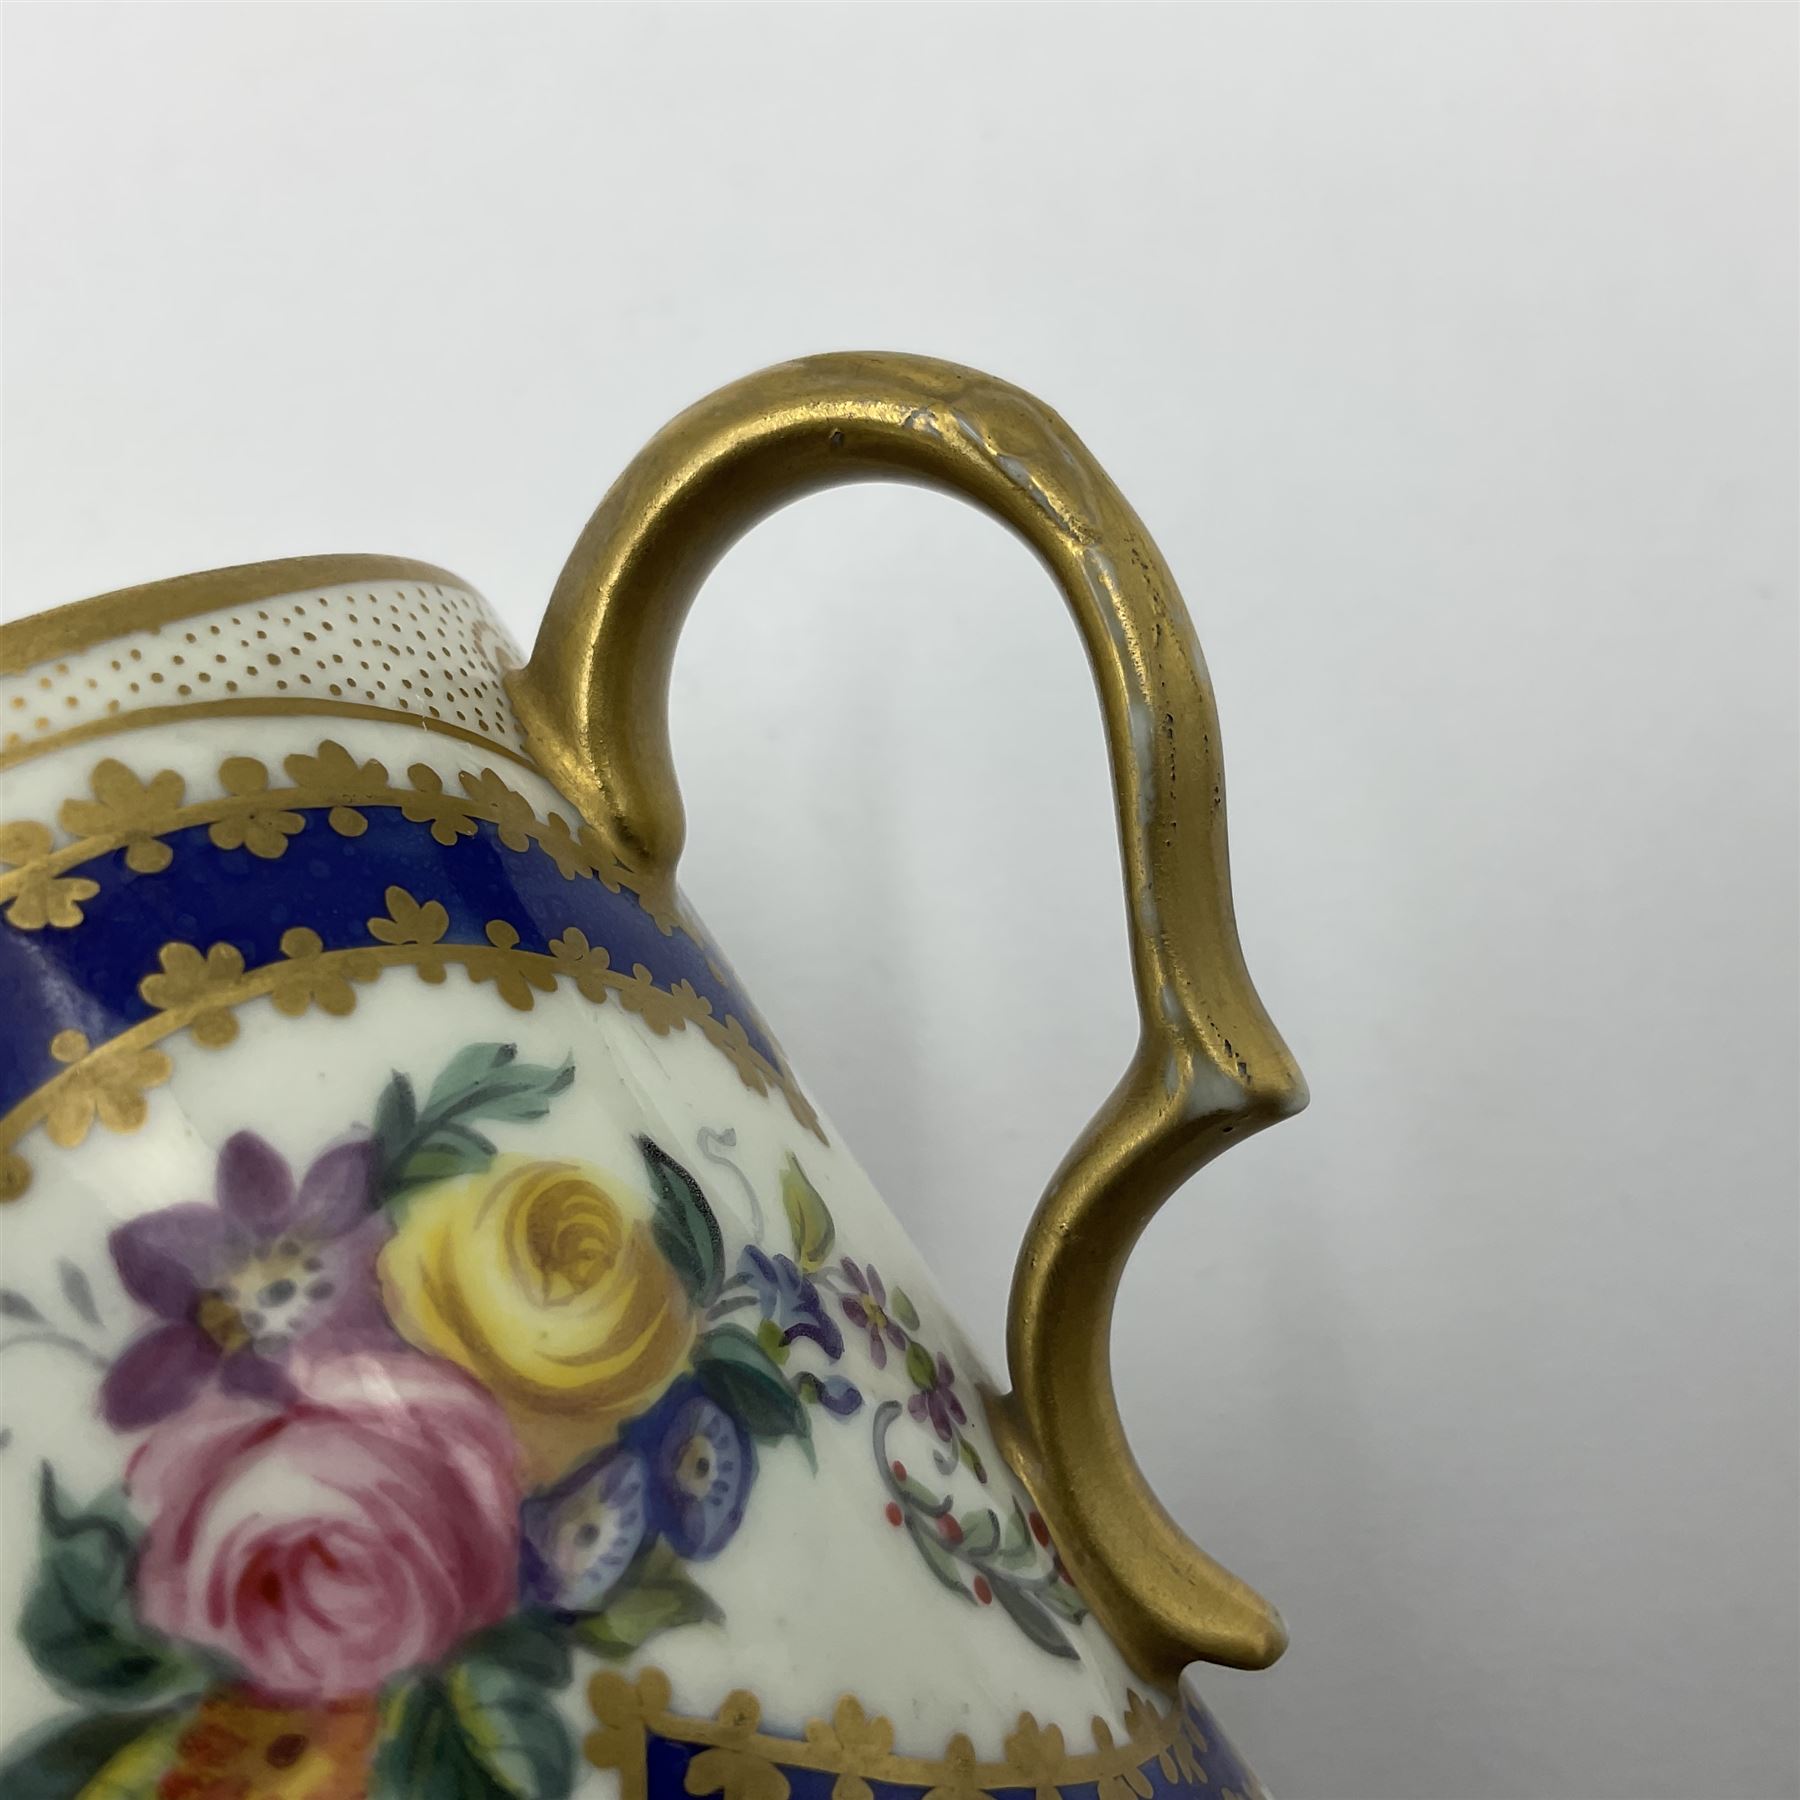 Sevres soft paste porcelain coffee can and saucer with date code for 1767 - Image 10 of 16